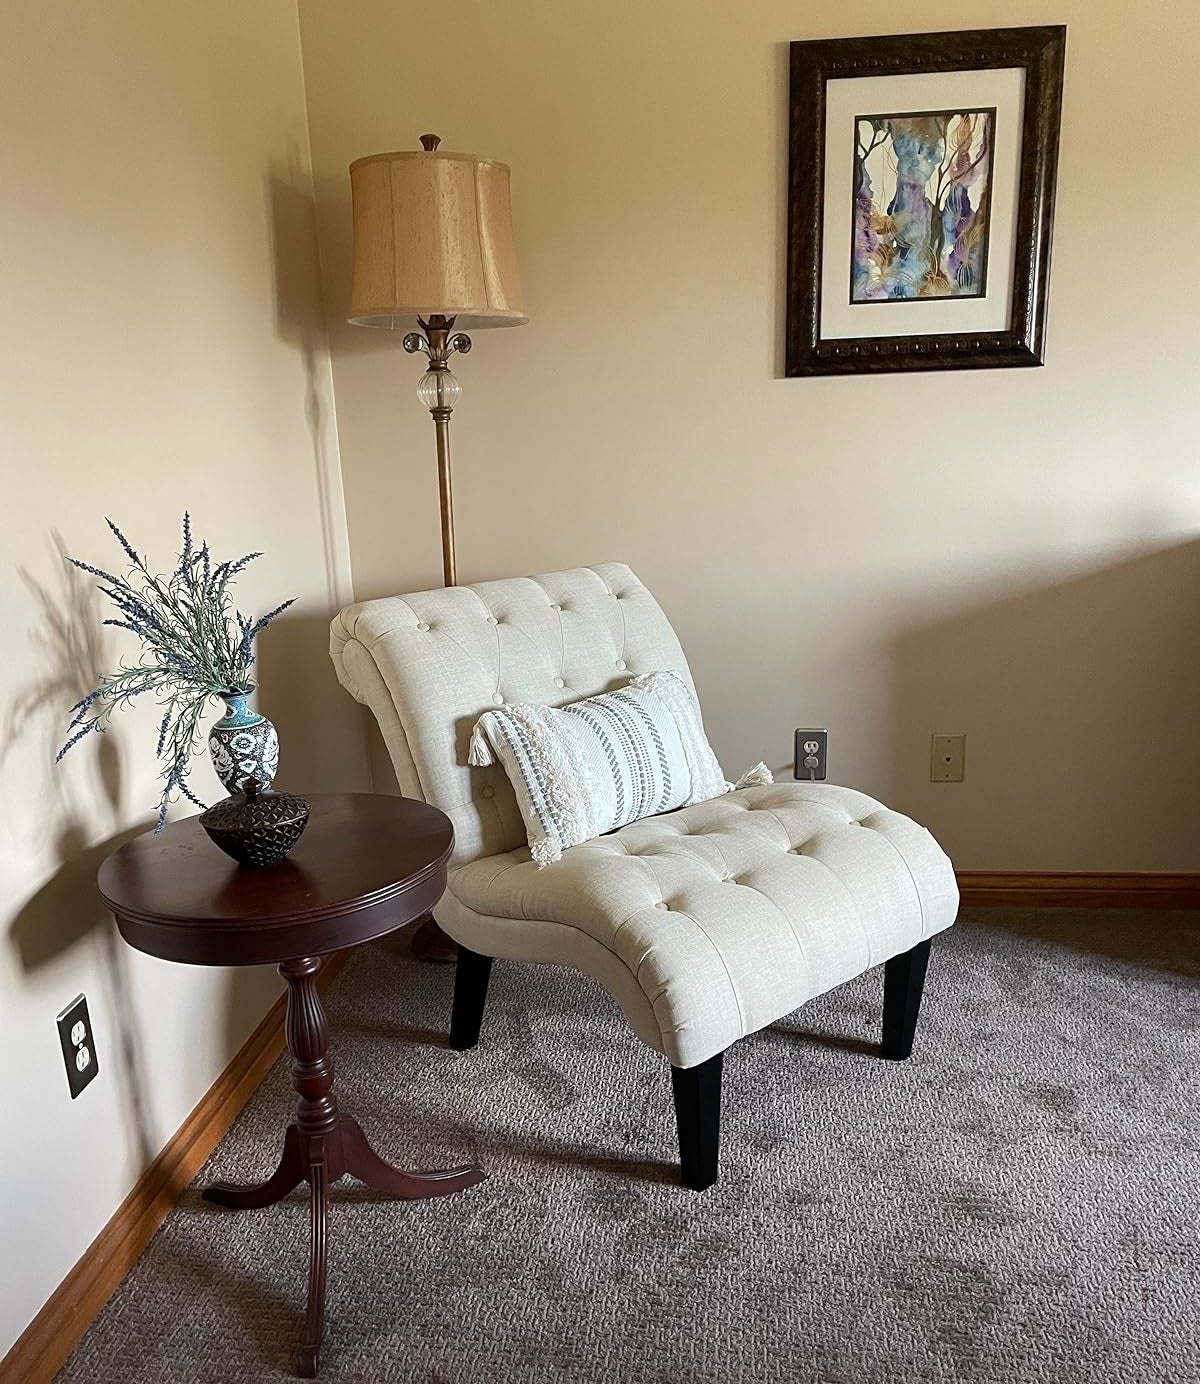 Elegant tufted armchair with beige upholstery, beside a wood side table with decorative items and a floor lamp